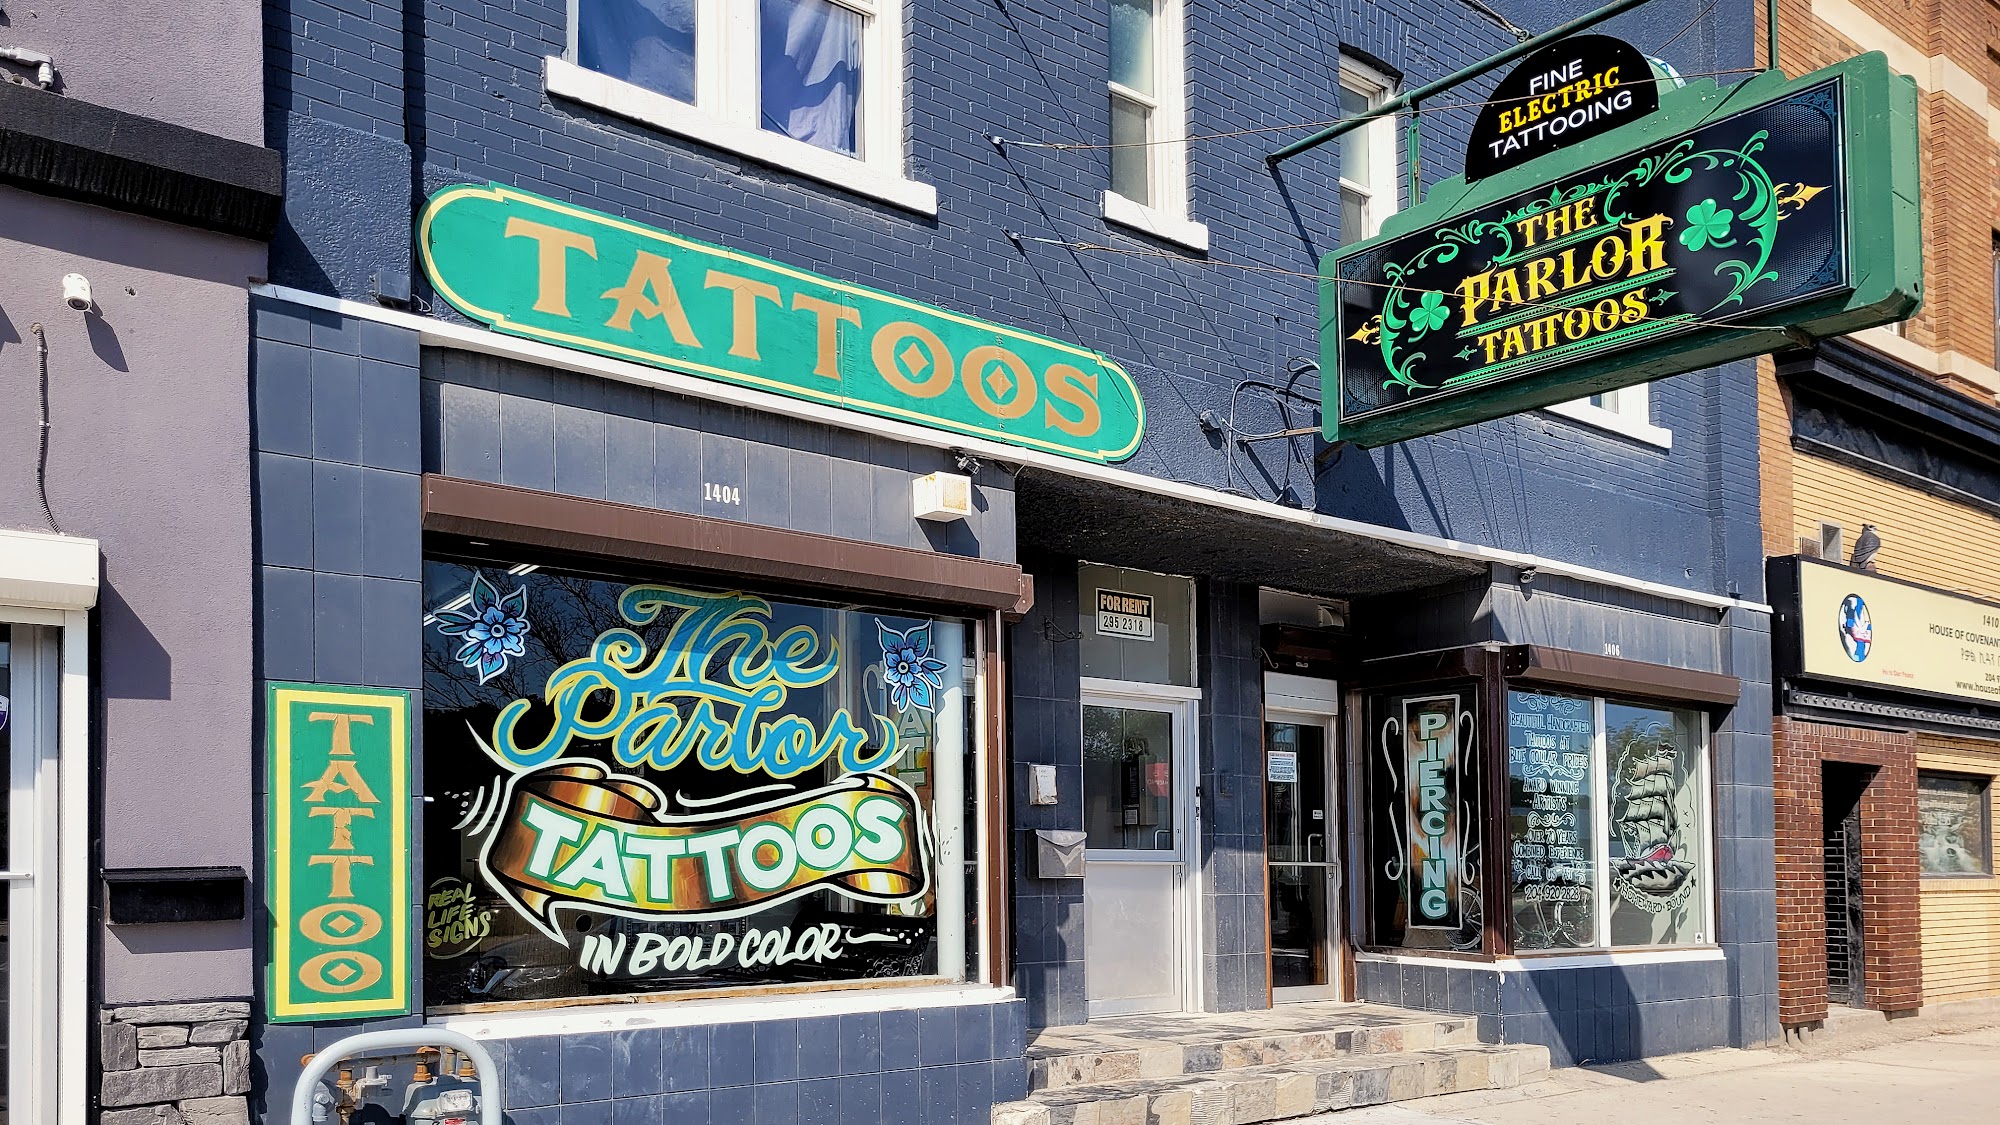 The Parlor Tattoos